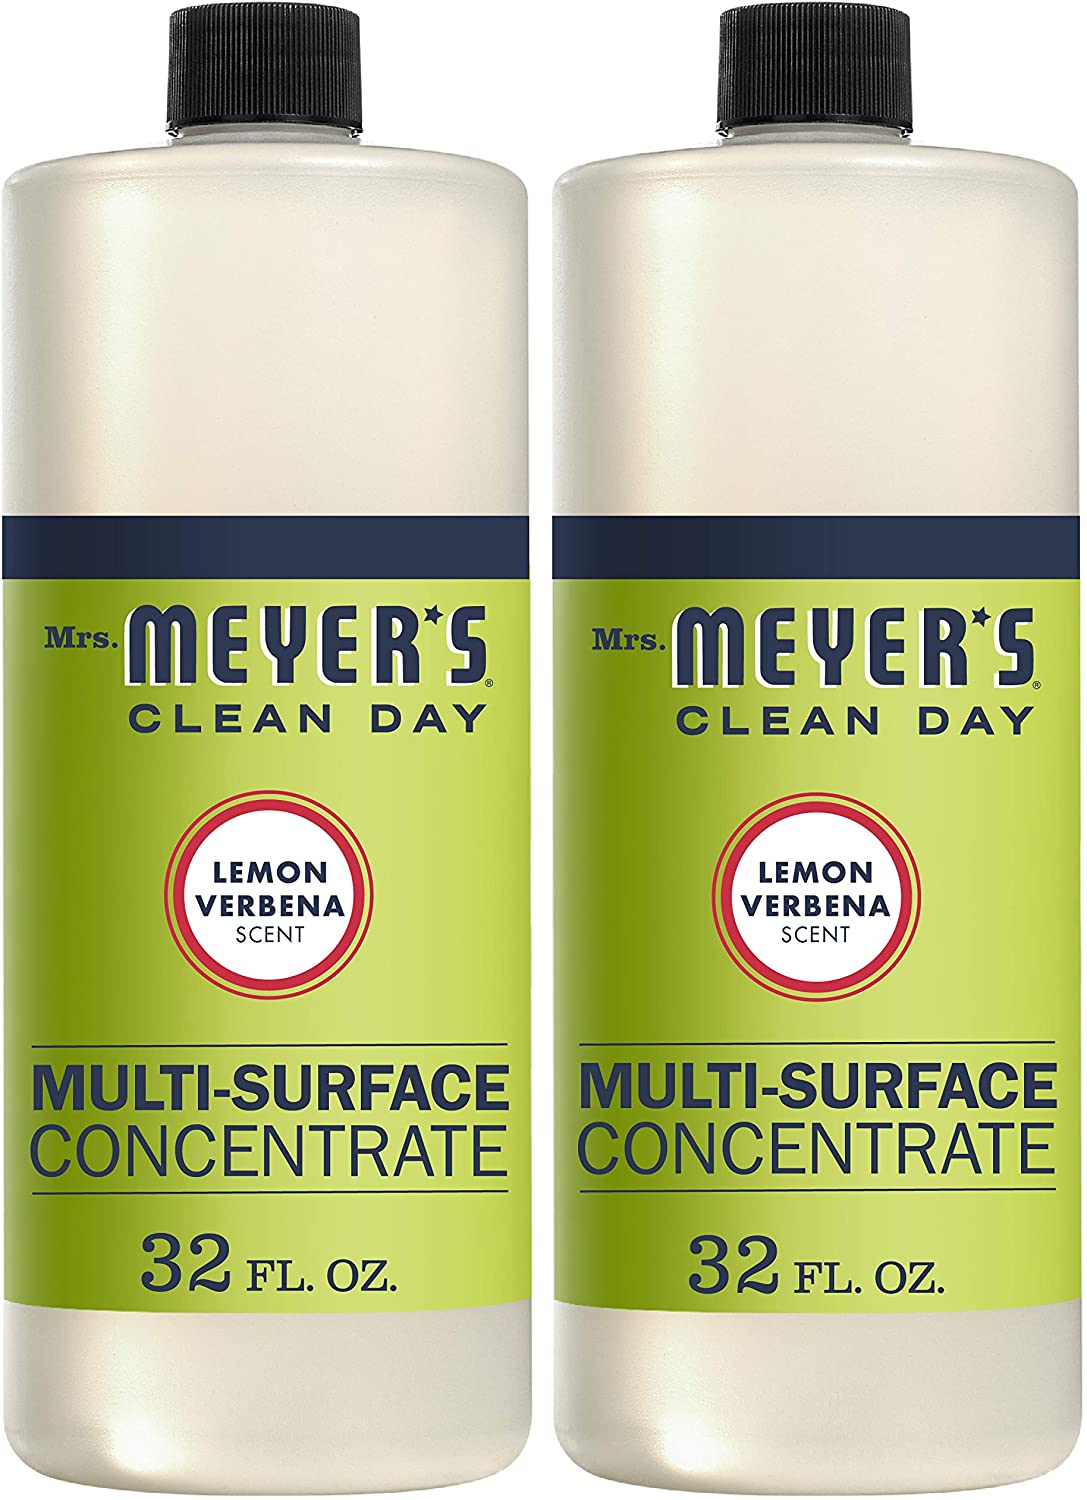 https://www.dontwasteyourmoney.com/wp-content/uploads/2021/09/mrs-meyers-clean-day-32-ounce-lemon-verbena-multi-surface-cleaner-concentrate-2-pack-floor-cleaner.jpg